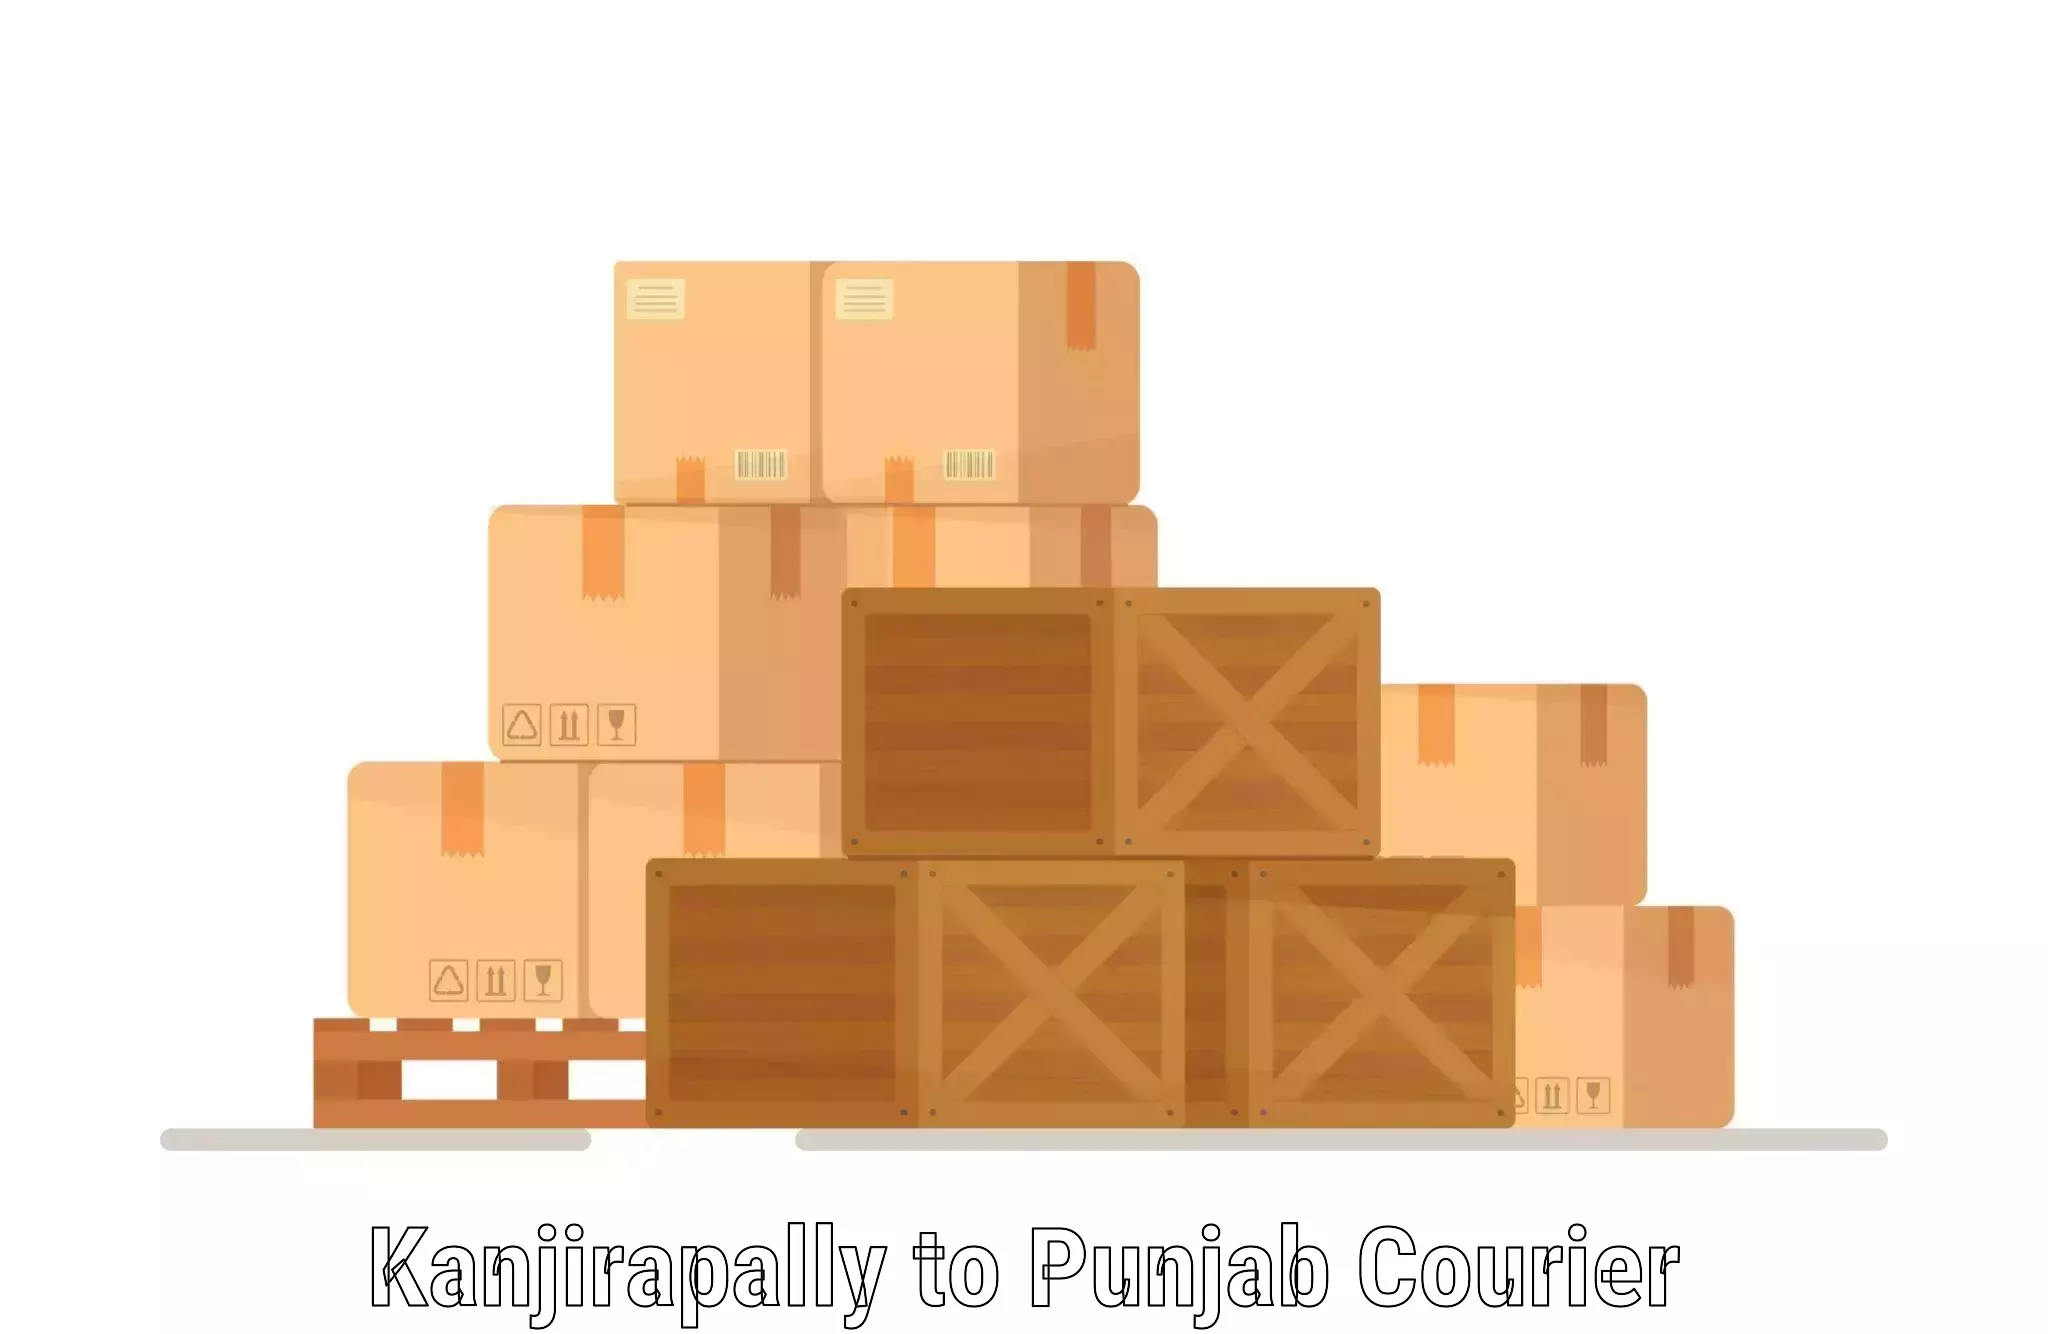 Comprehensive freight services Kanjirapally to Fatehgarh Sahib